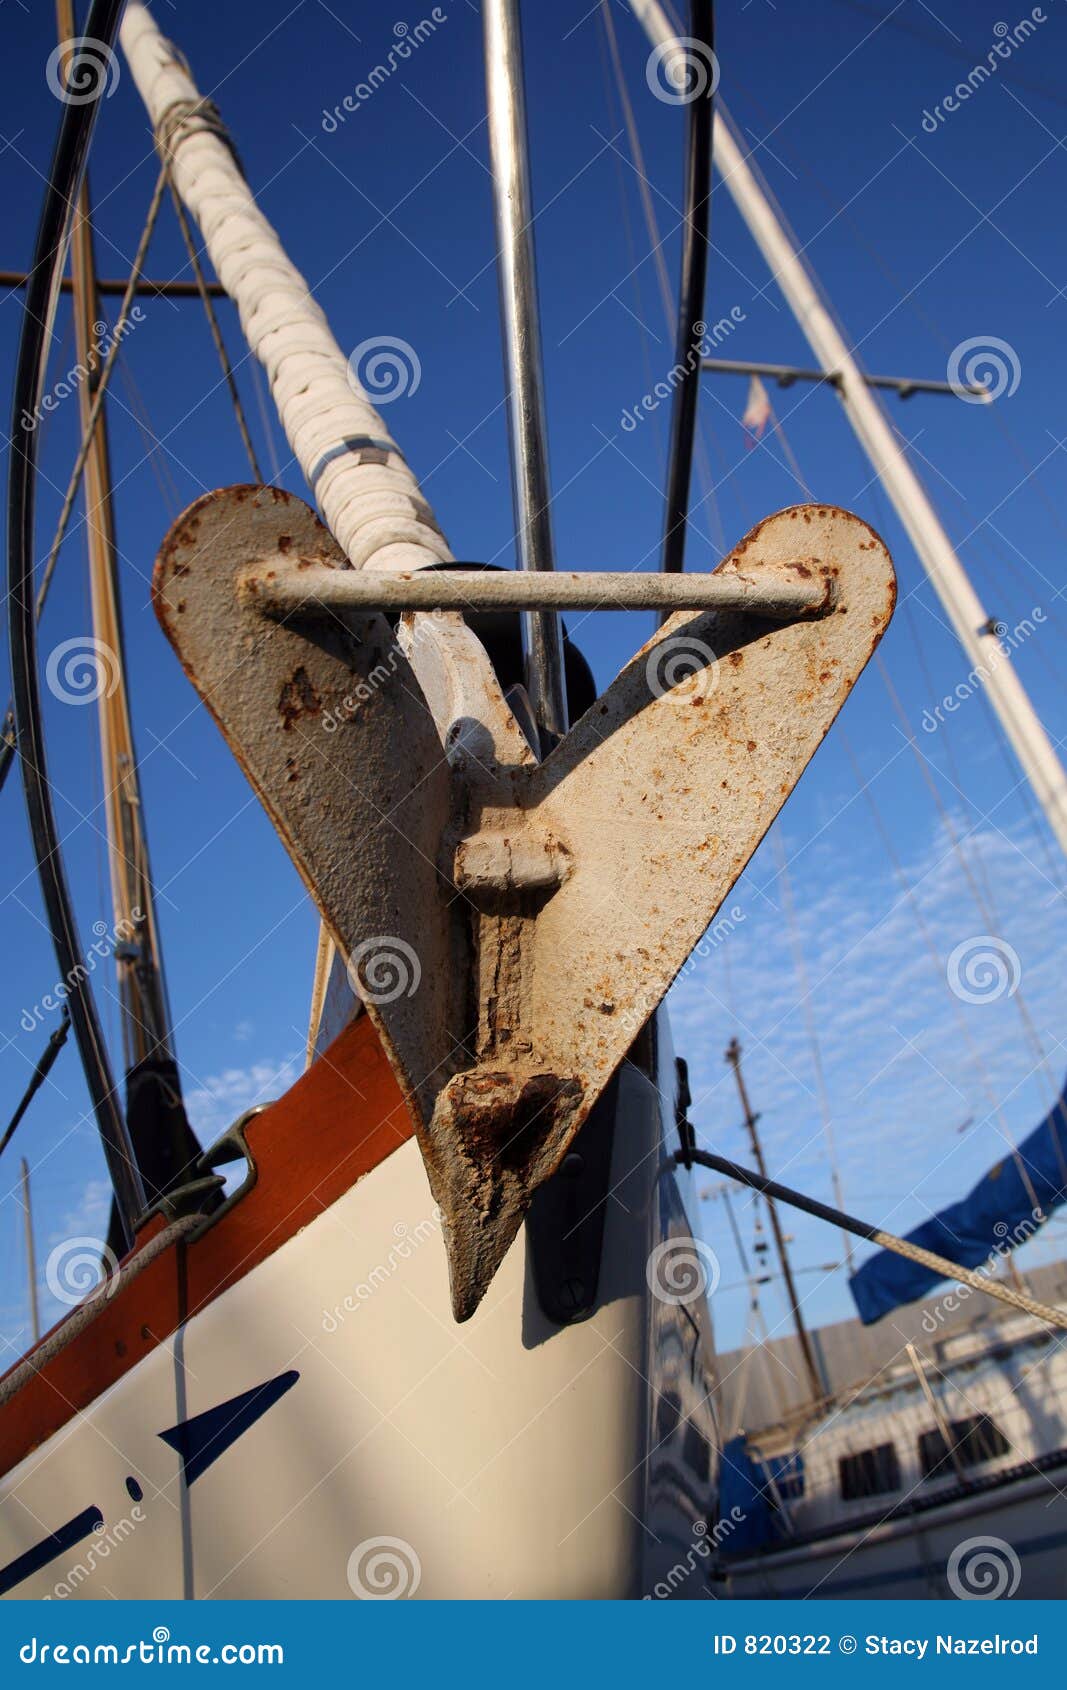 https://thumbs.dreamstime.com/z/boat-anchor-bow-820322.jpg